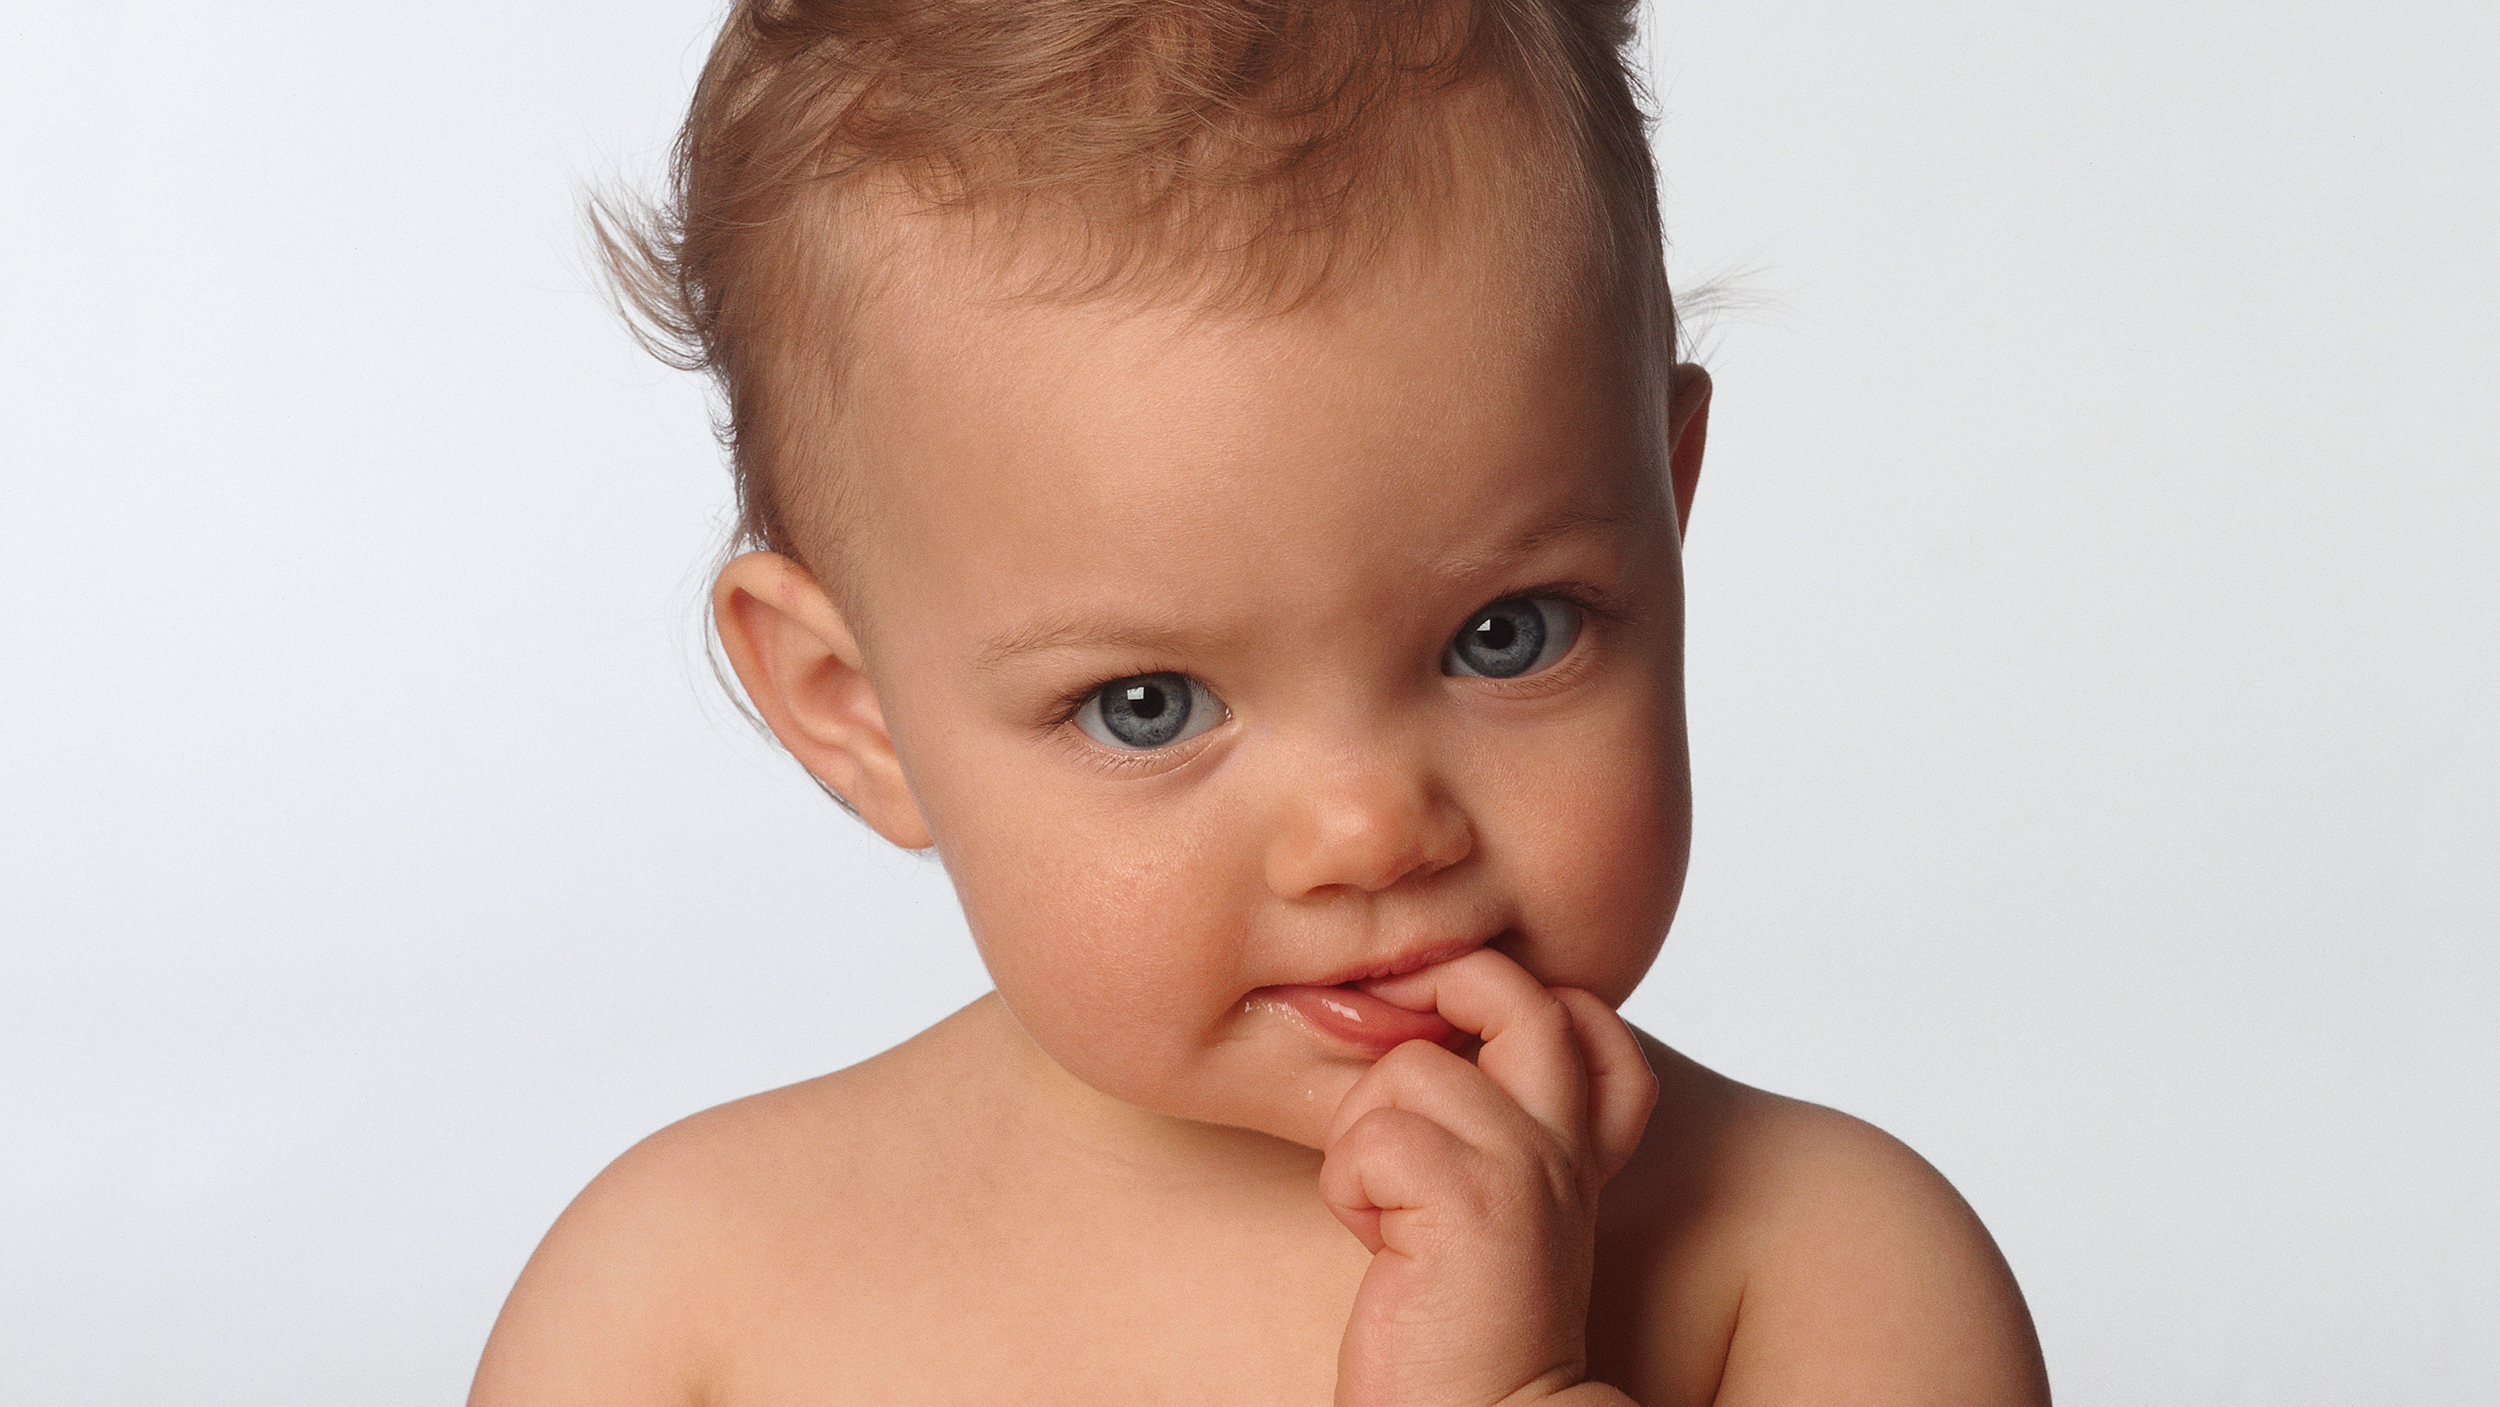 The 22 most outrageous baby names of 2013: Rarity, Ransom, Subaru and more - TODAY.com